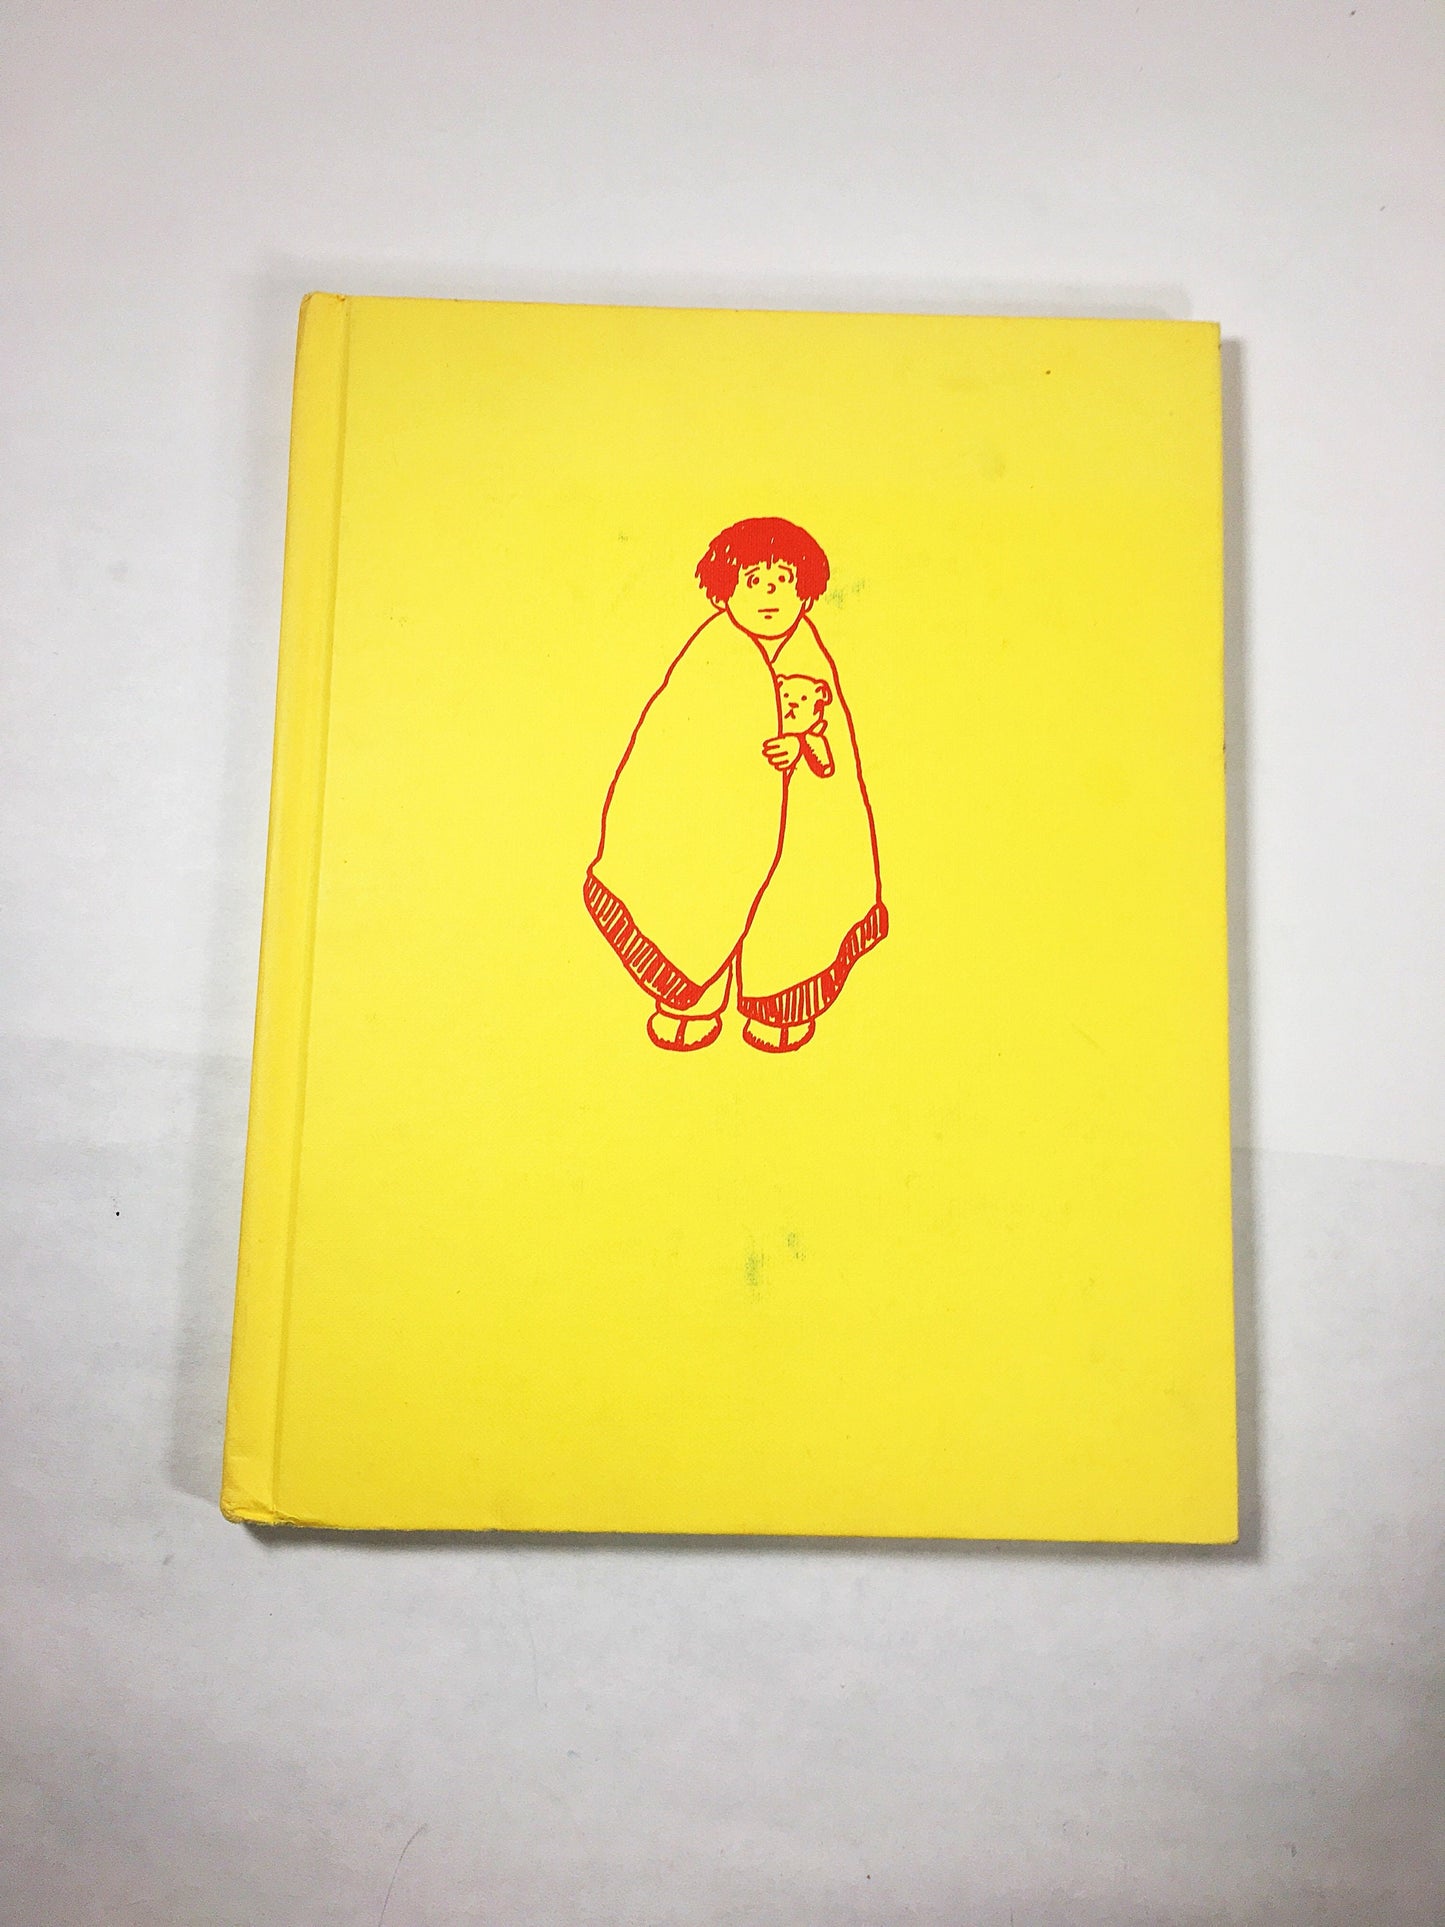 Ira Sleeps Over by Bernard Waber Vintage children's book circa 1972 about spending the night at a friend's without teddy bear. Yellow decor